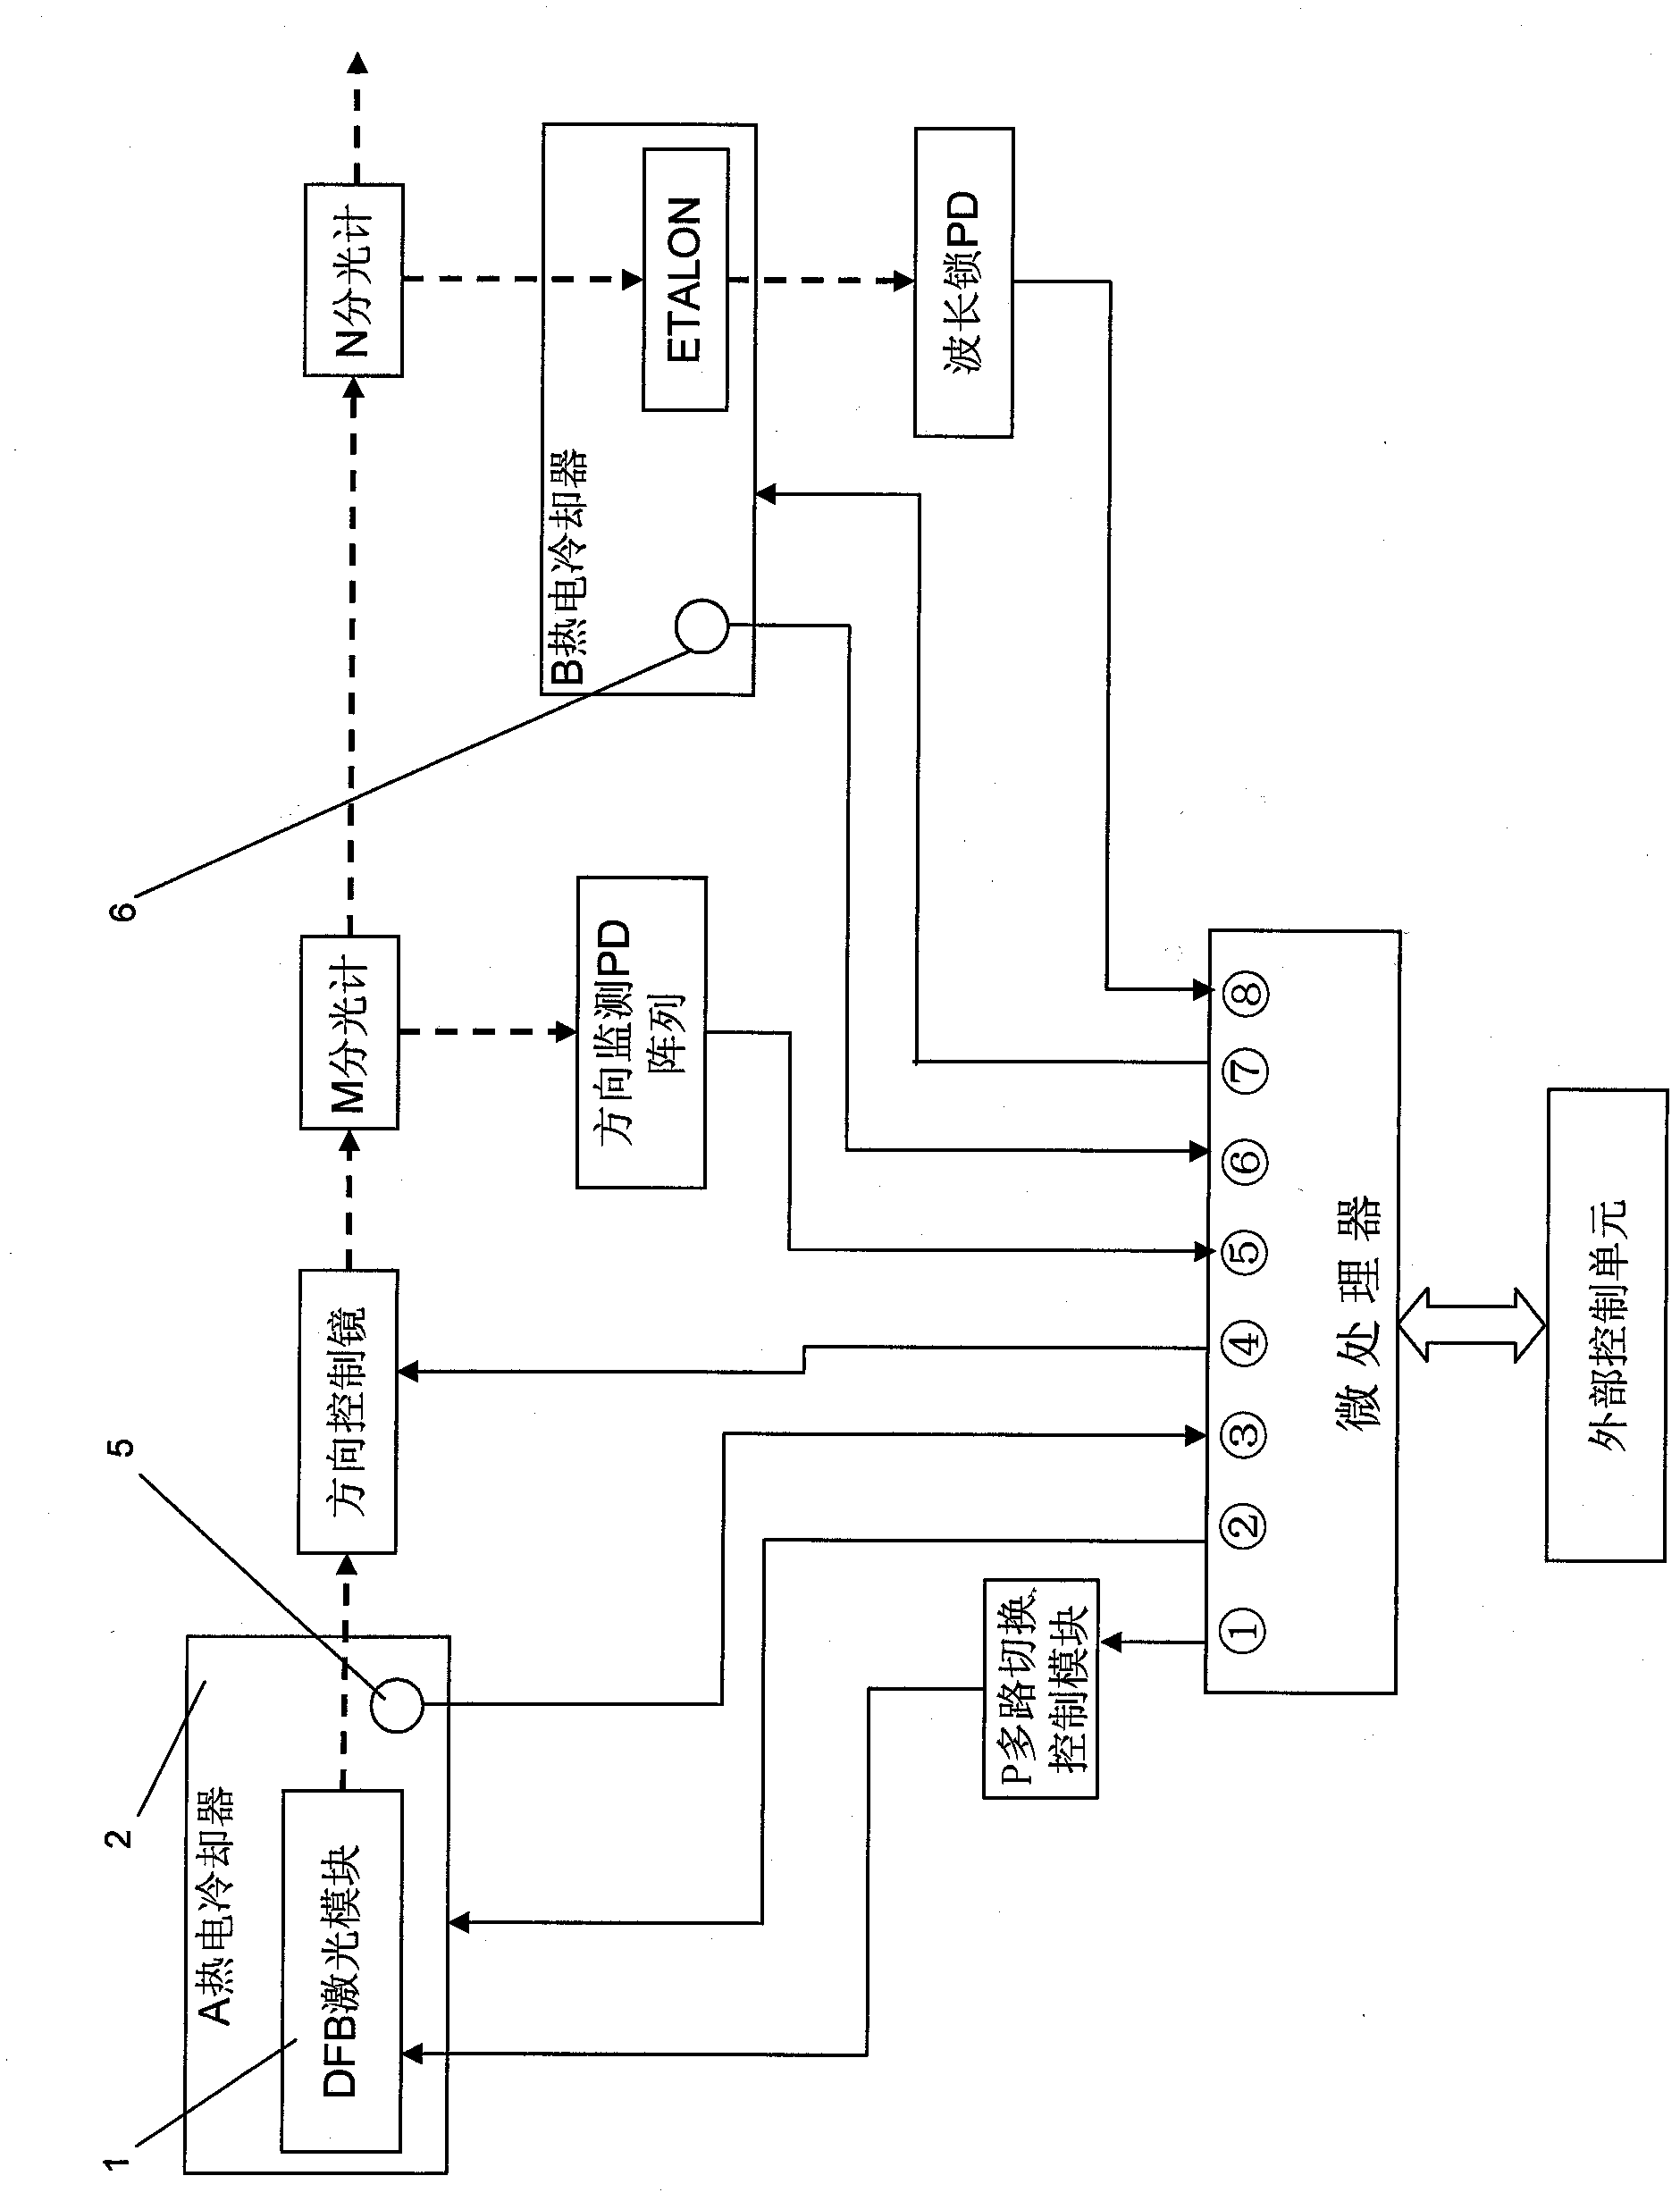 Wavelength-tunable laser system and control method thereof